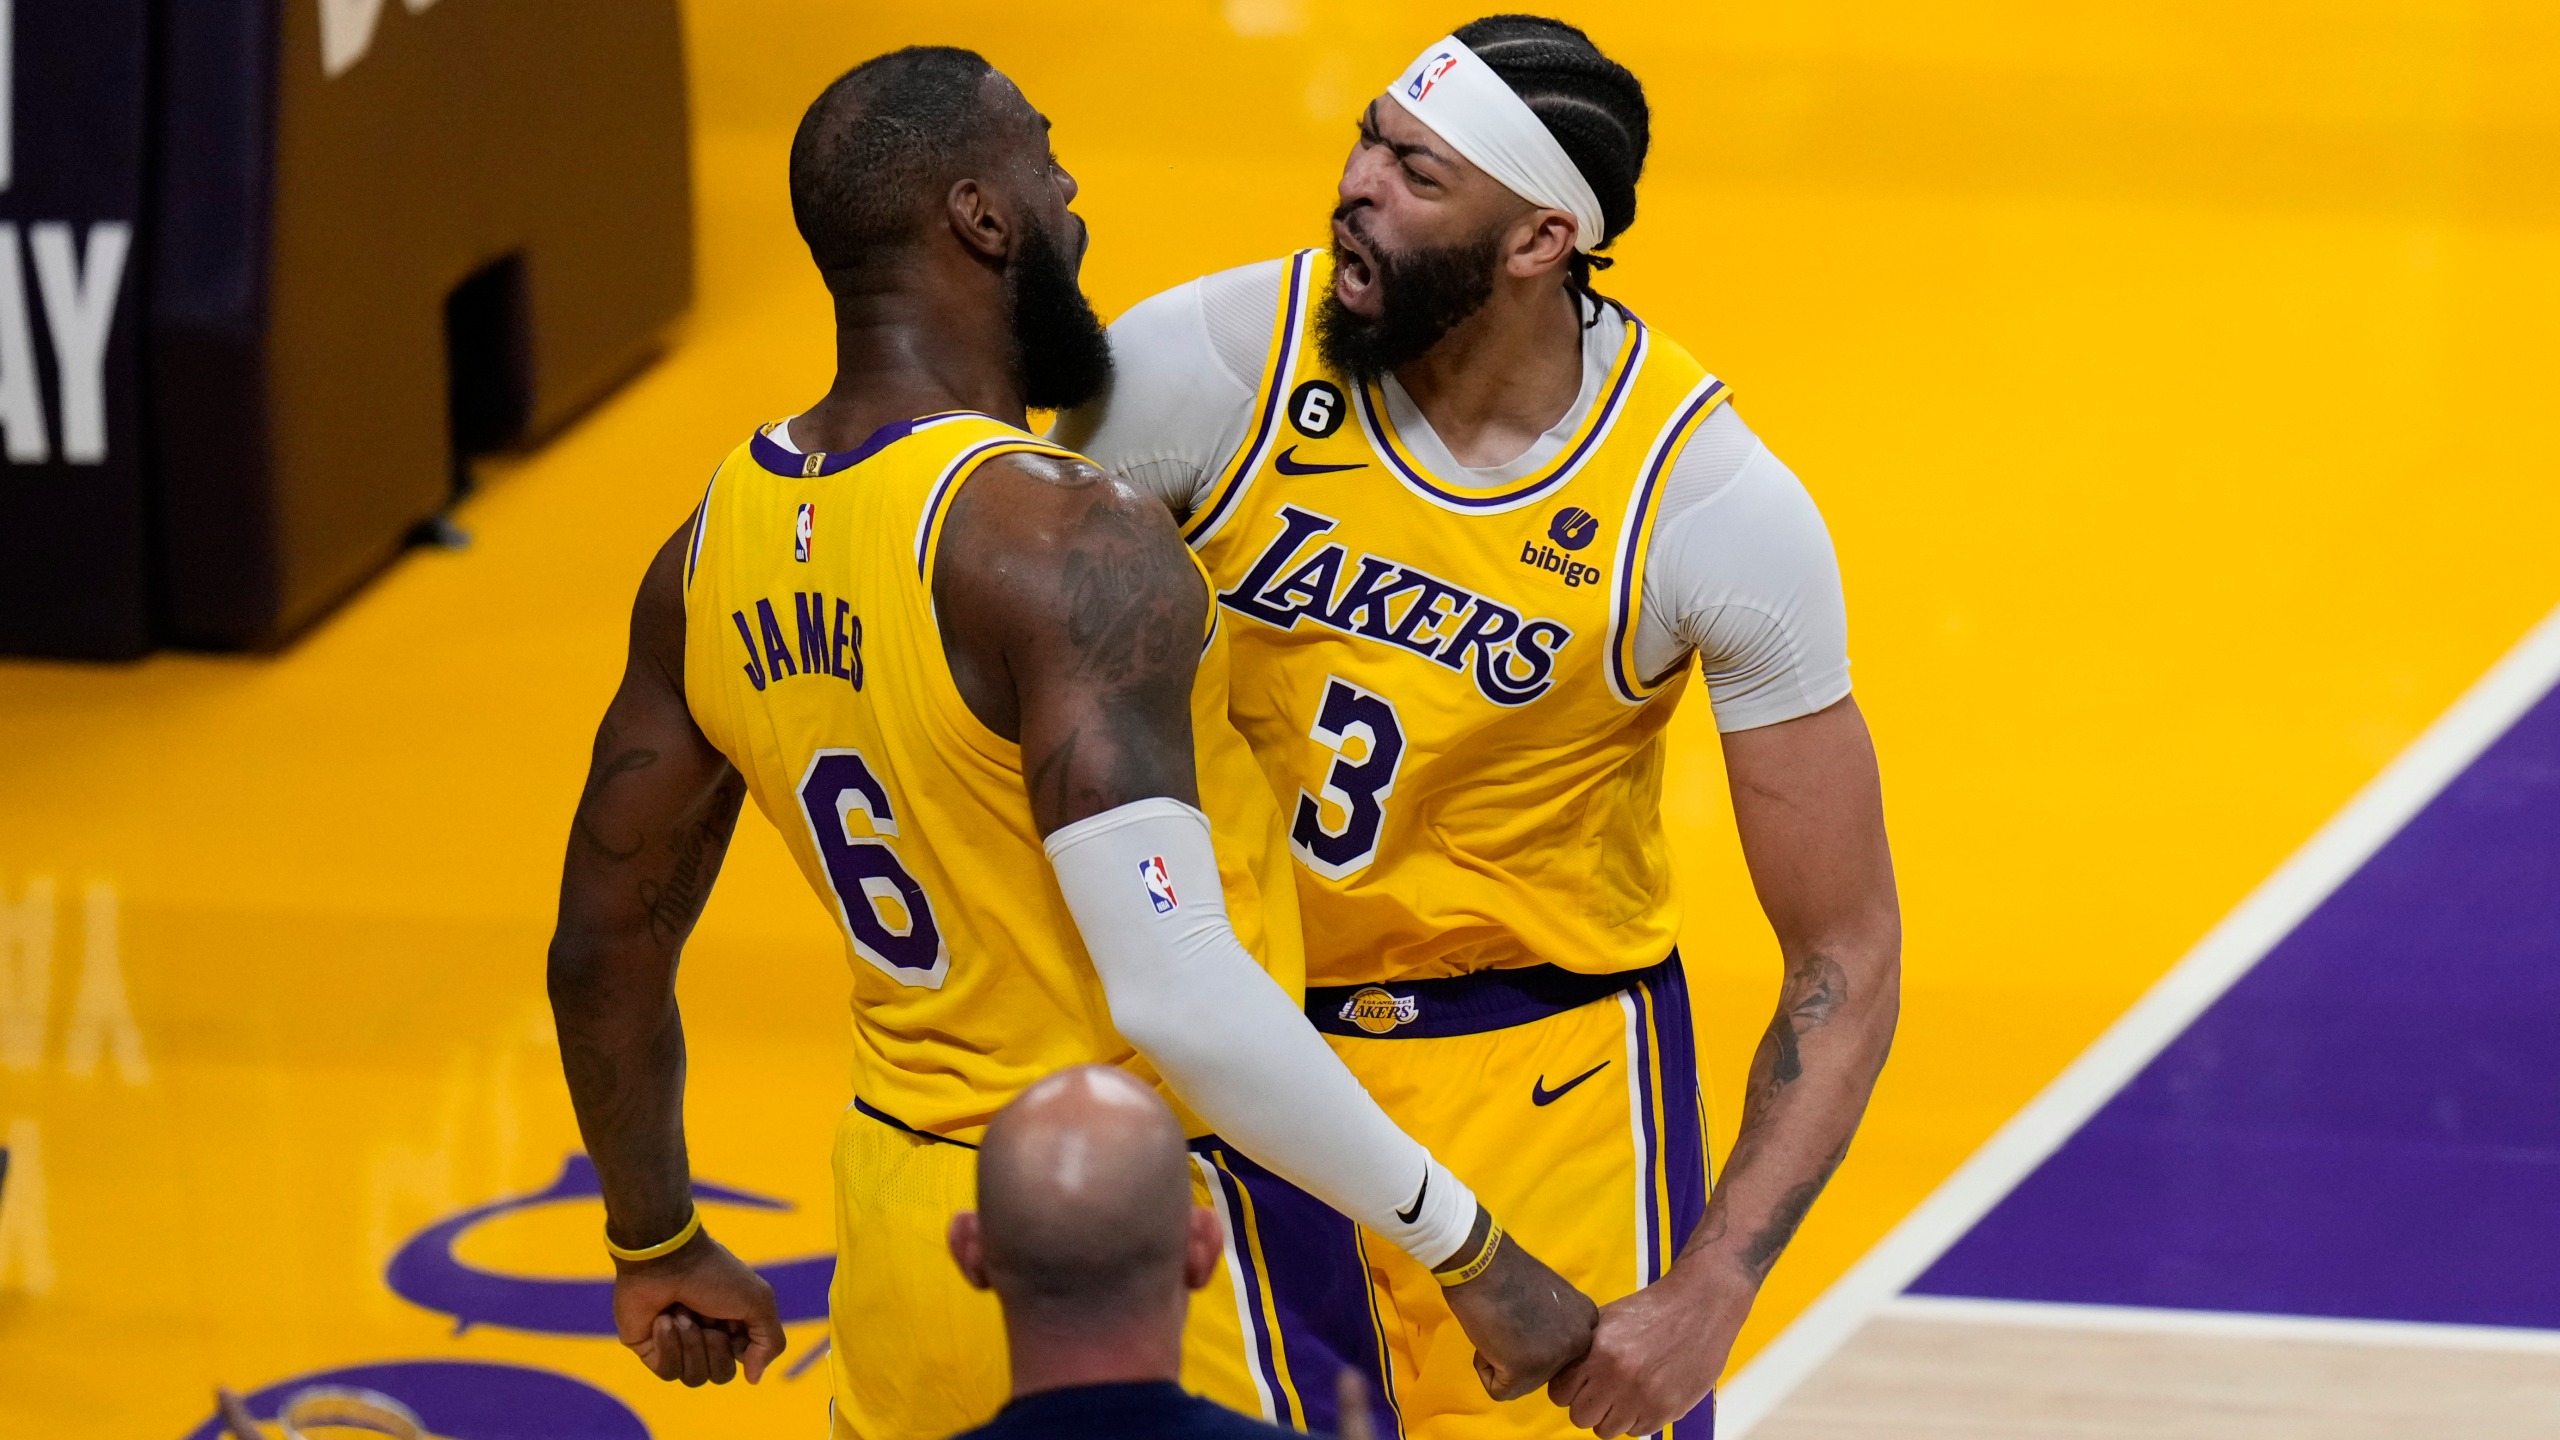 LeBron leads Lakers past Grizz 117-111 in OT for 3-1 lead | WTNH.com